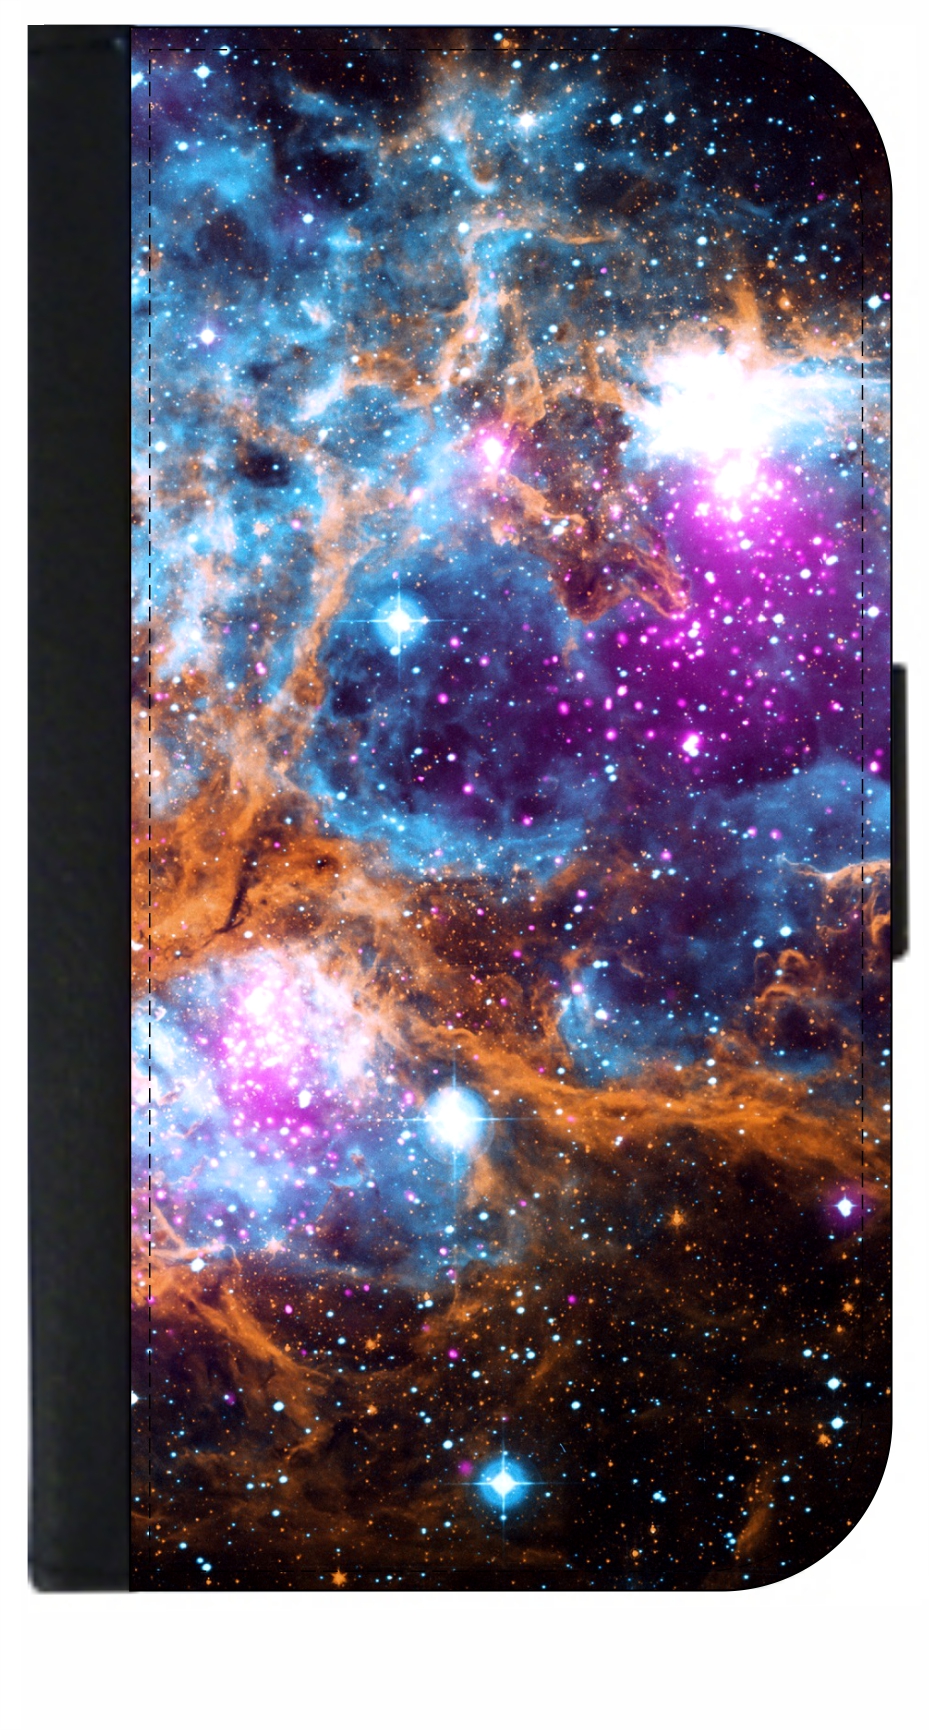 Outer Space Galaxy Nebula - Galaxy s10p Case - Galaxy s10 Plus Case - Galaxy s10 Plus Wallet Case - s10 Plus Case Wallet - Galaxy s10 Plus Case Wallet - s10 Plus Case Flip Cover - image 1 of 3